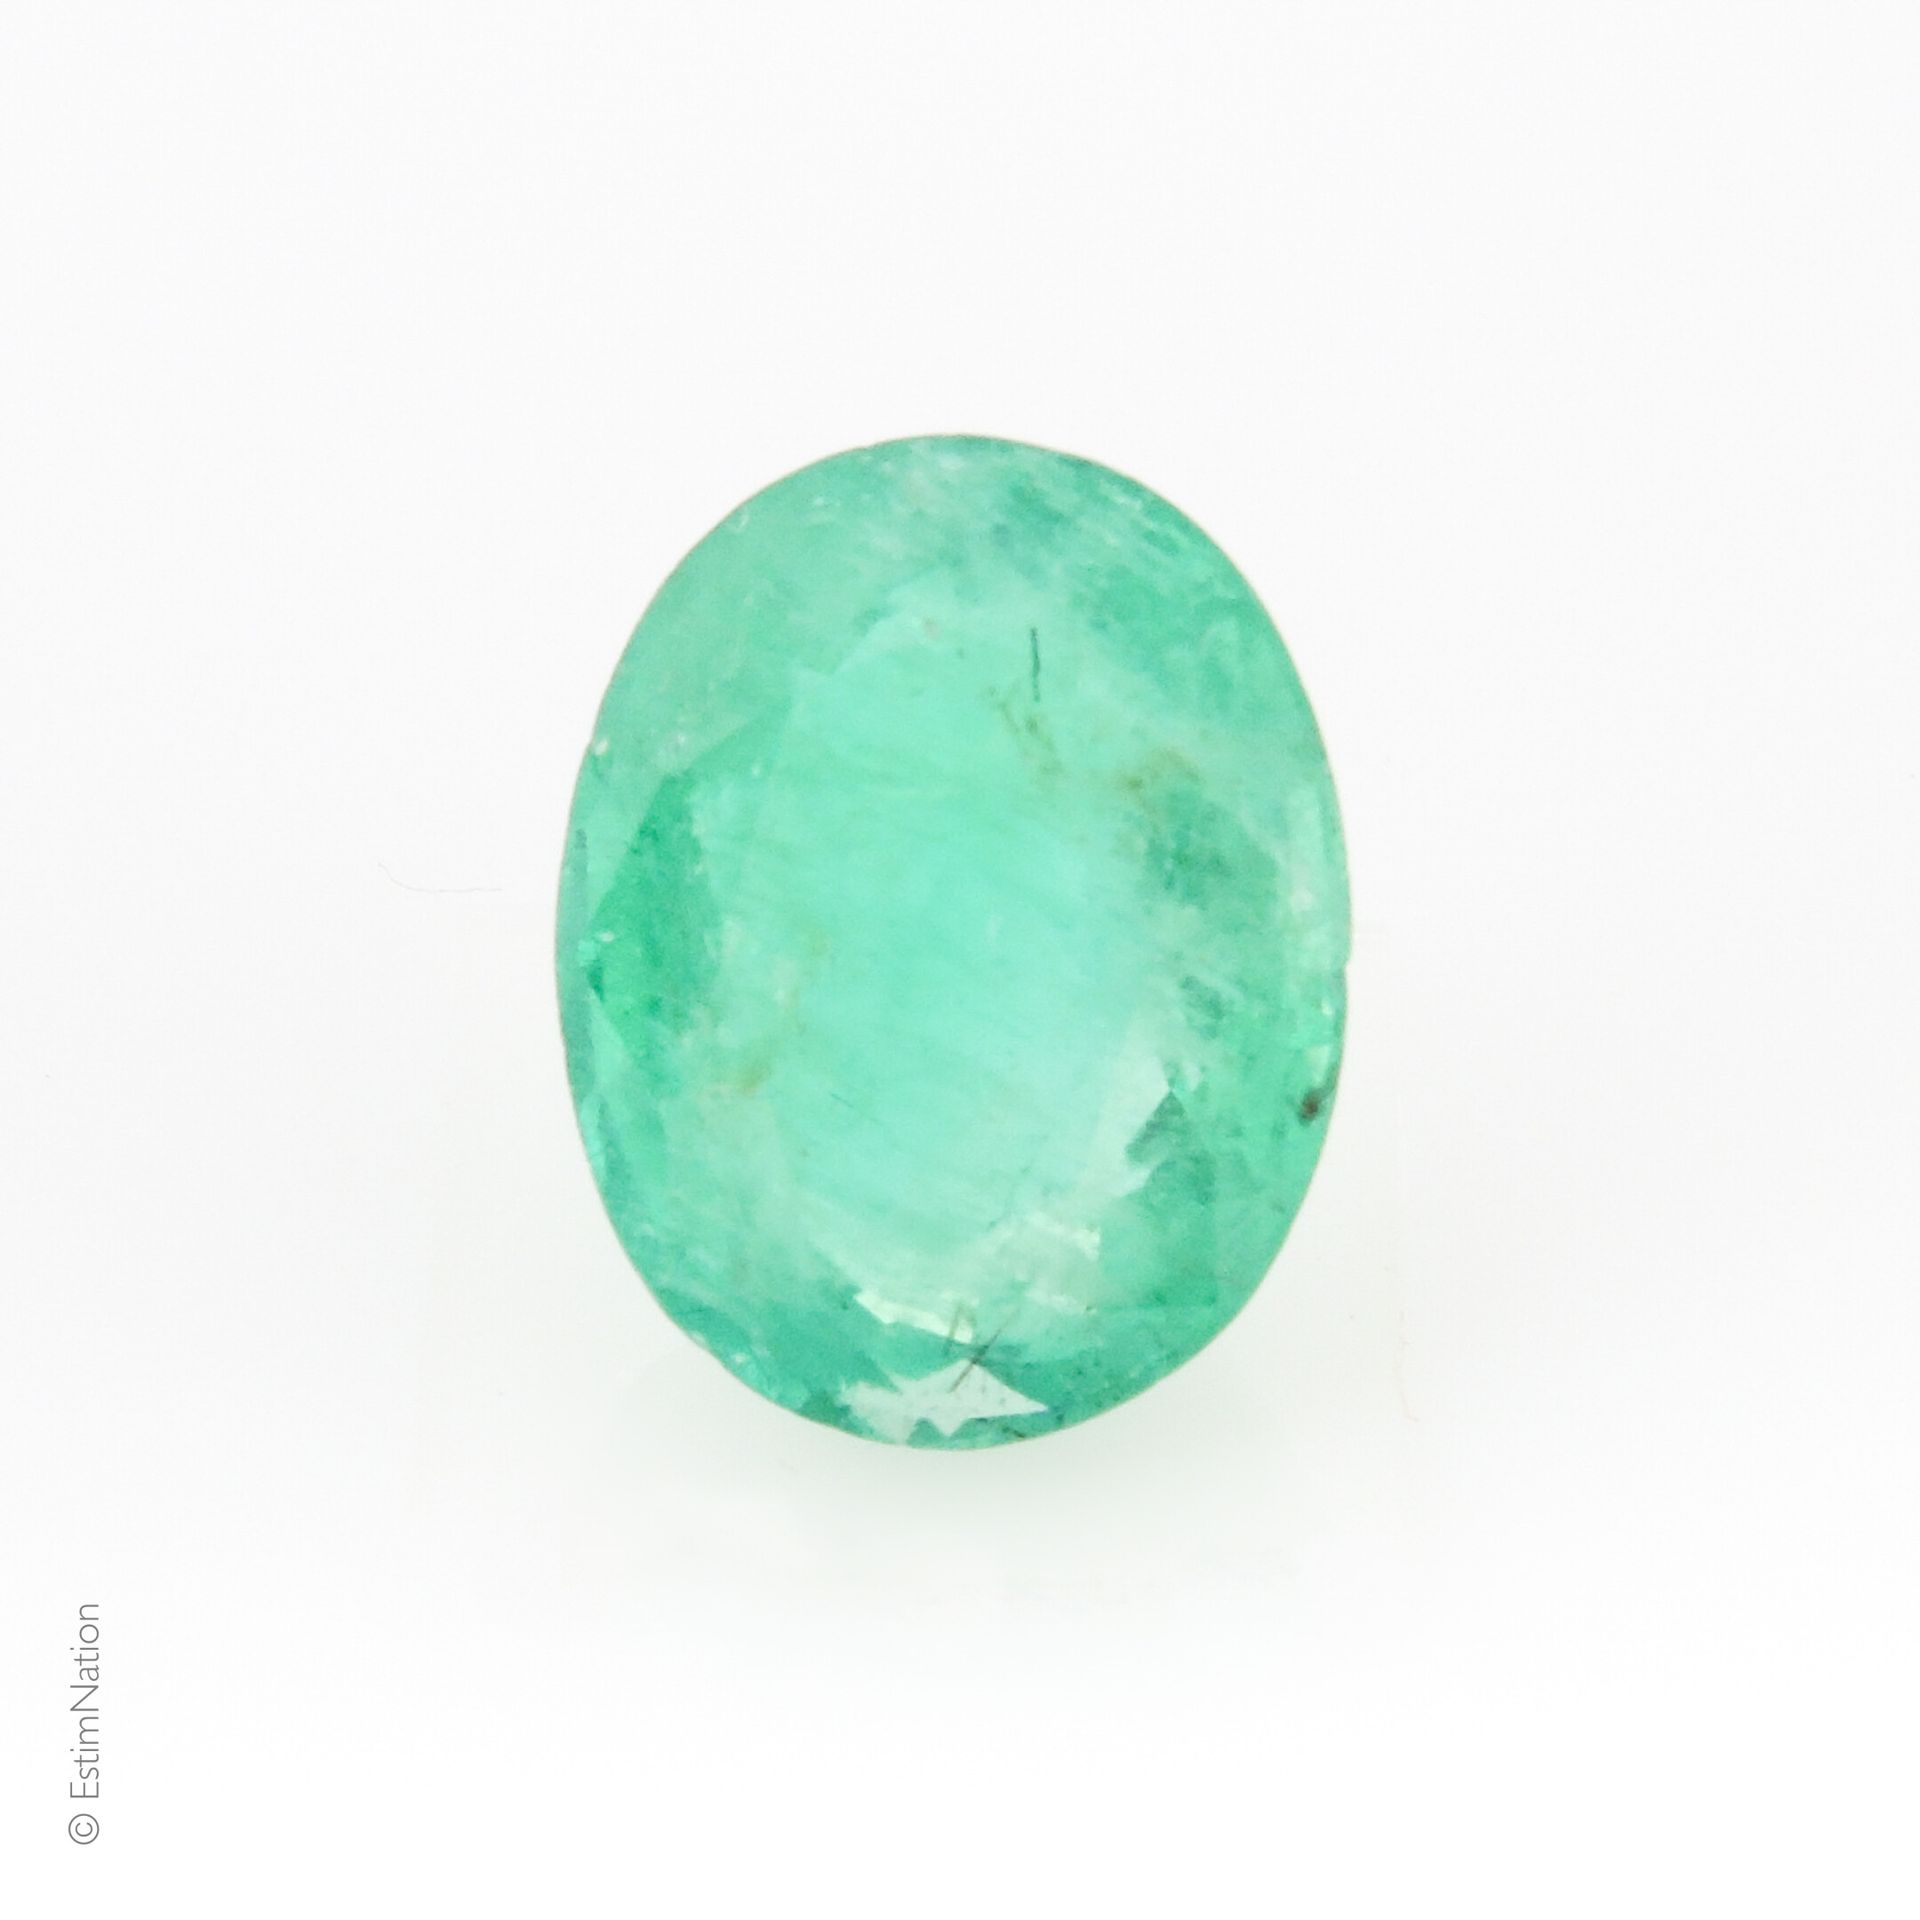 EMERAUDE 4.25 CARATS Oval faceted emerald weighing approximately 4.25 carat. 

D&hellip;